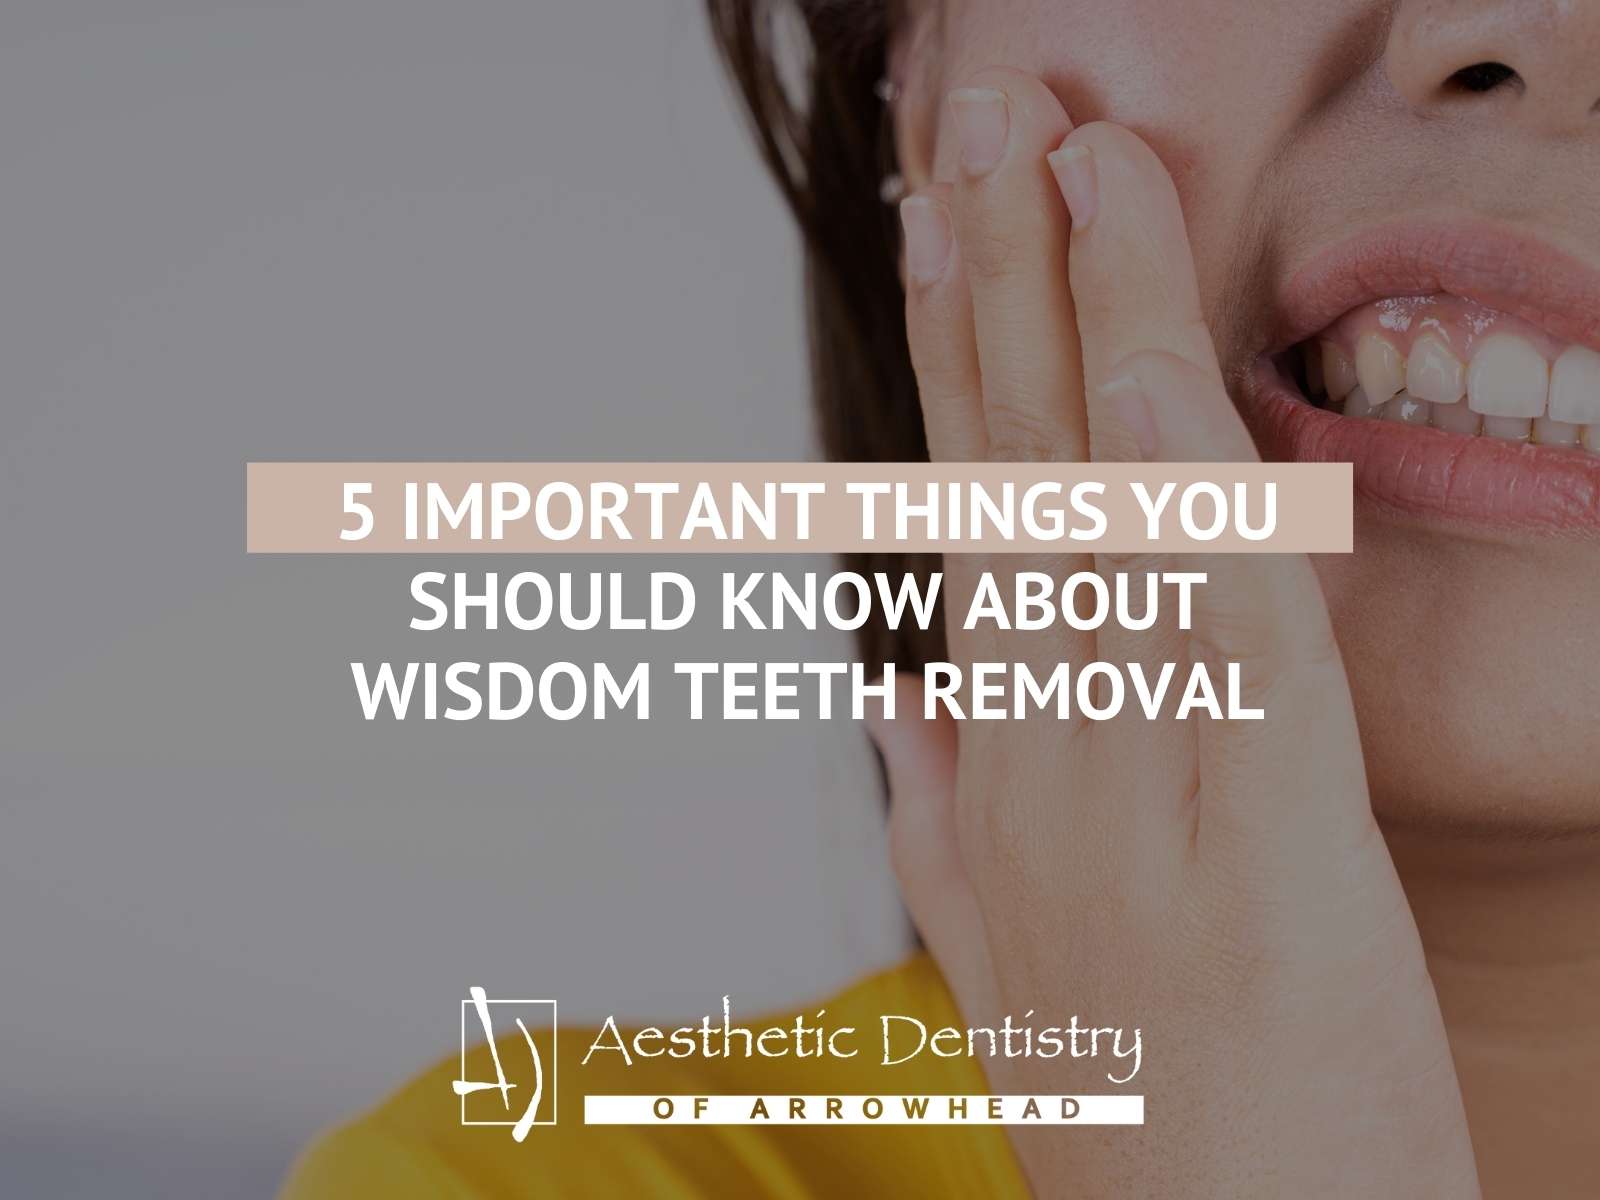 5 Important Things You Should Know About Wisdom Teeth Removal